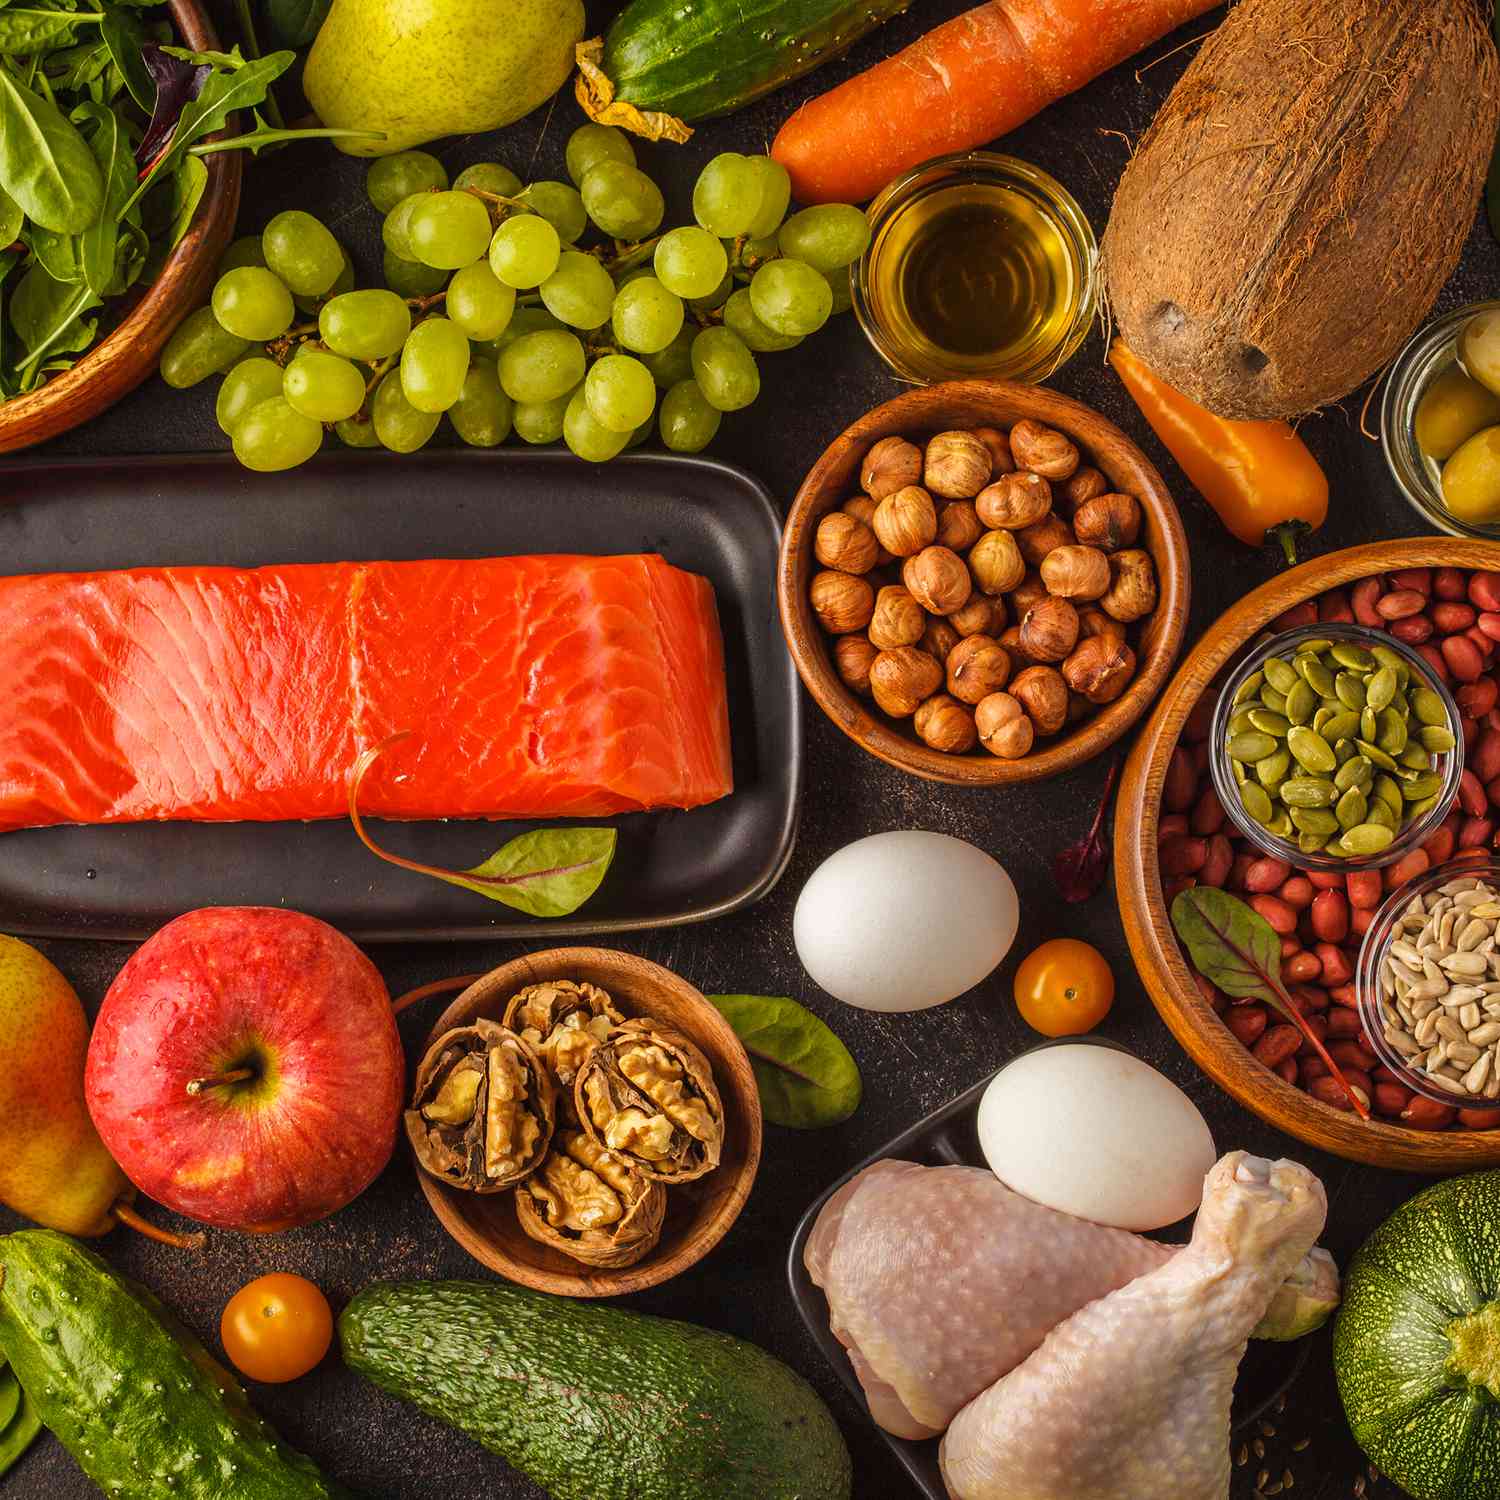 paleo diet good for addressing inflammation